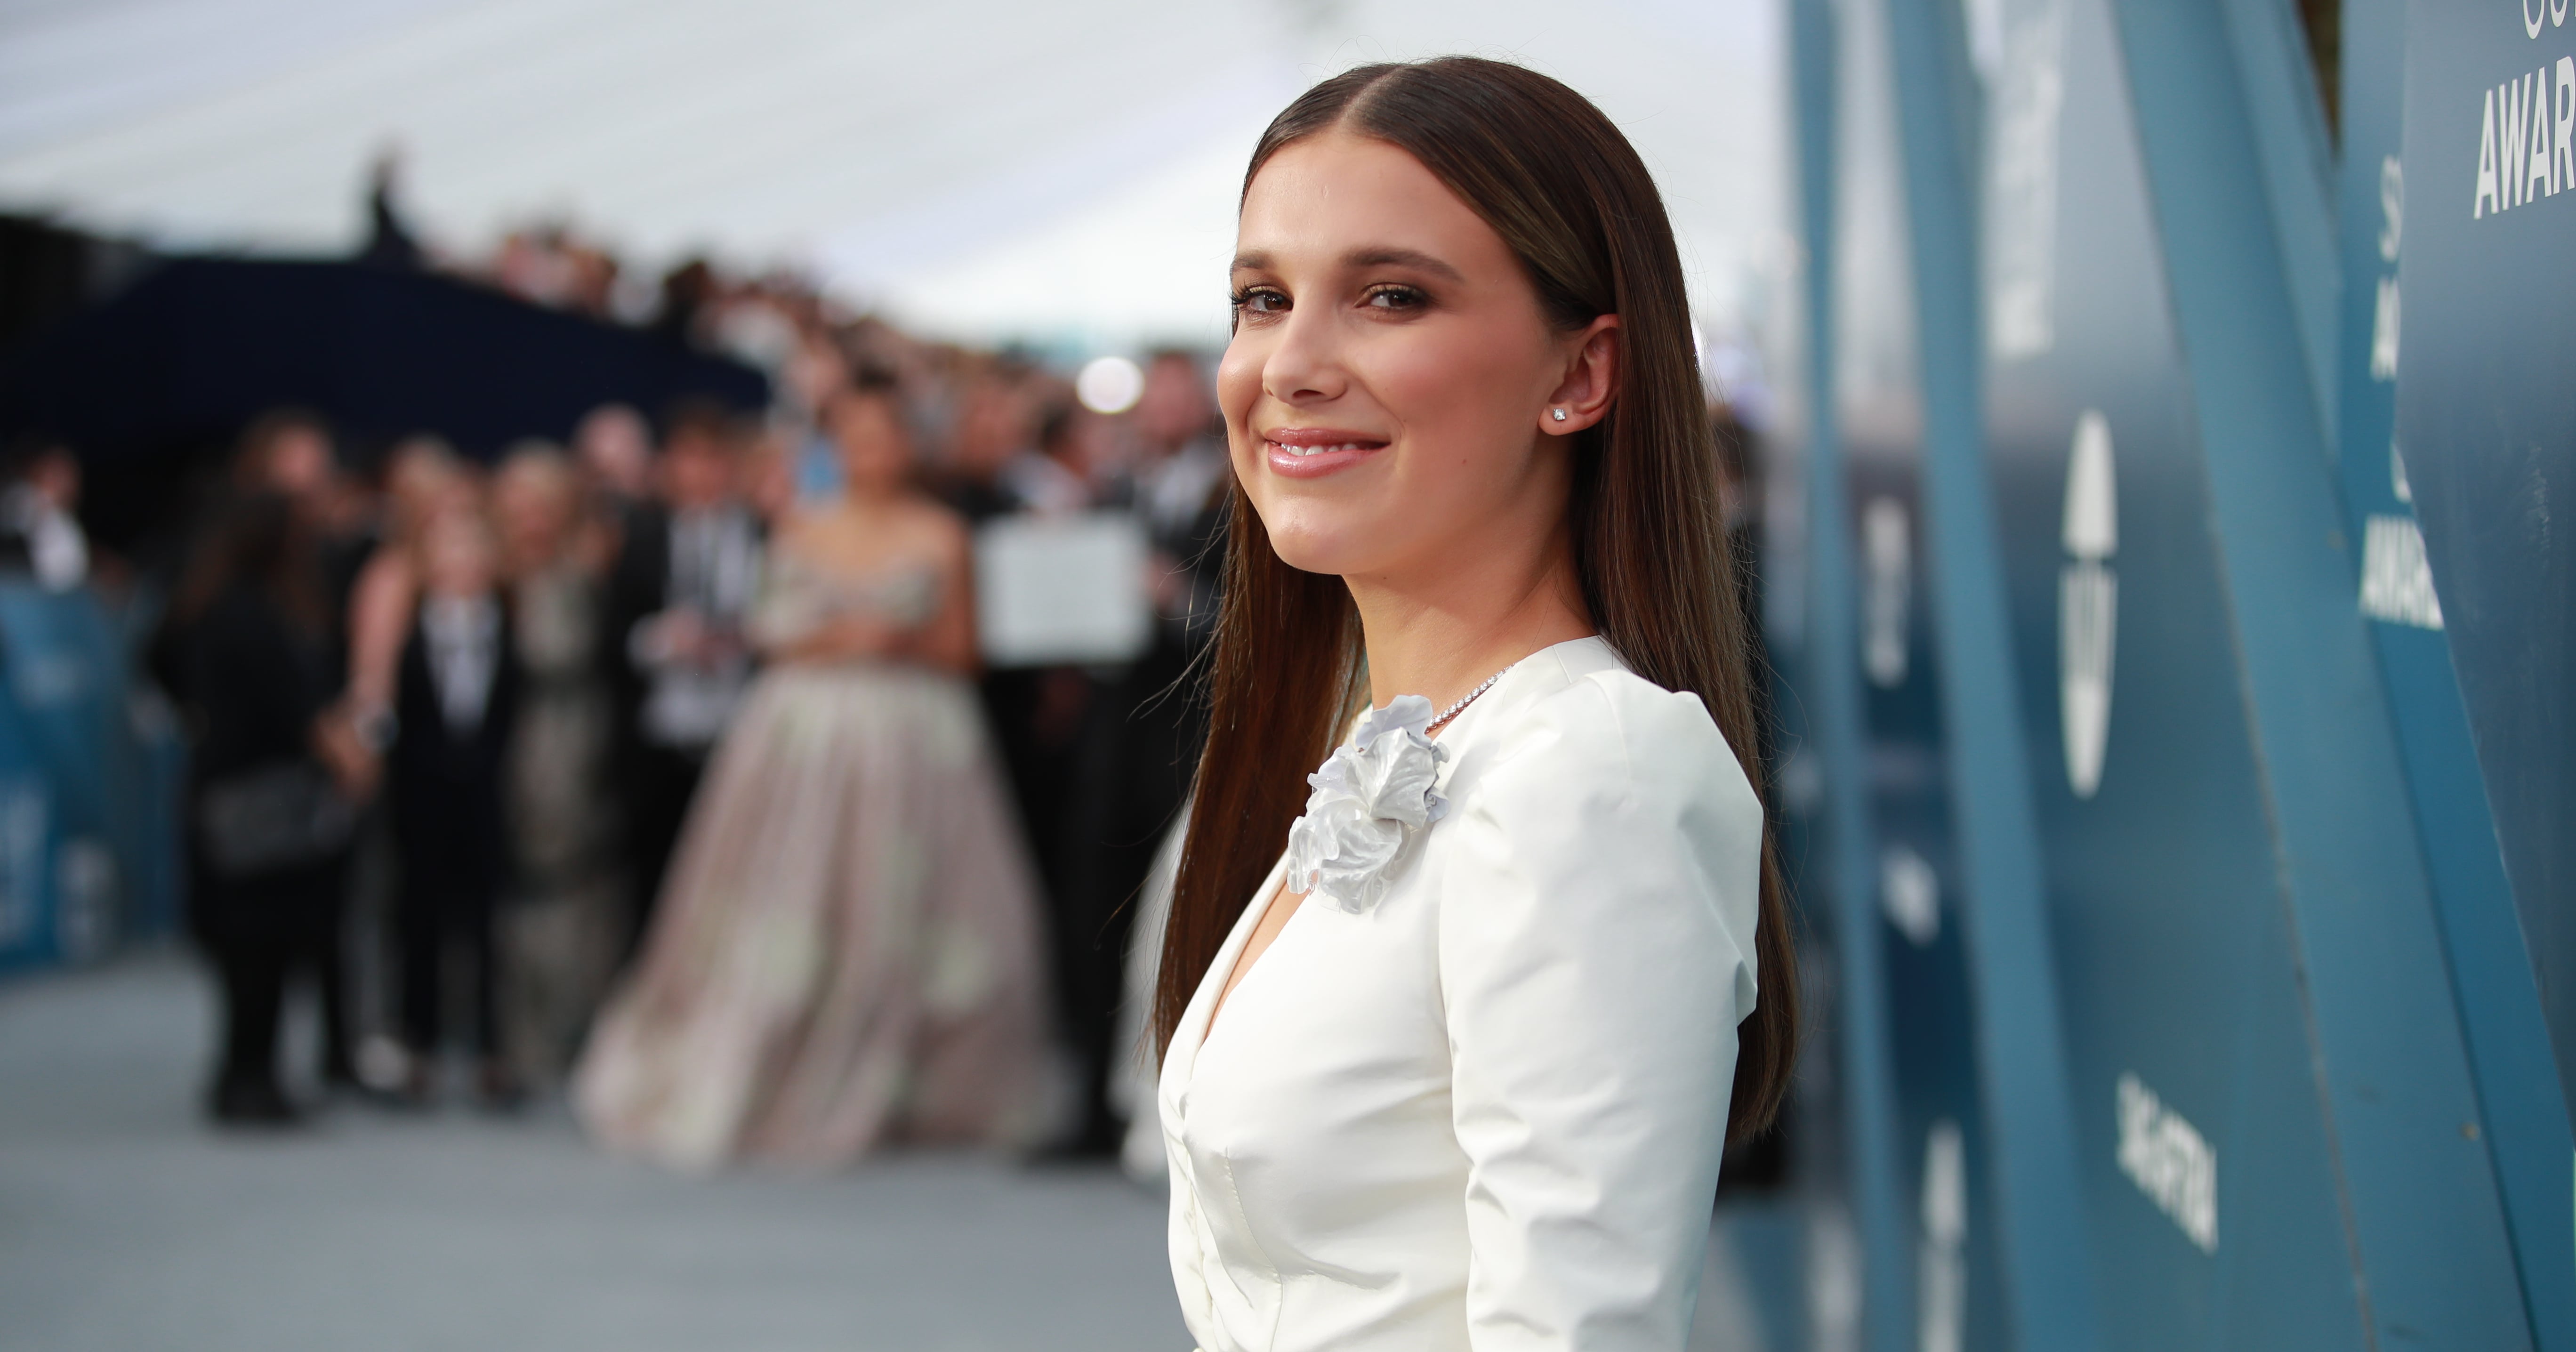 Millie Bobby Brown looks practically unrecognizable with bangs and an  all-grown-up gown, plus more great photos of celebs this week, Gallery